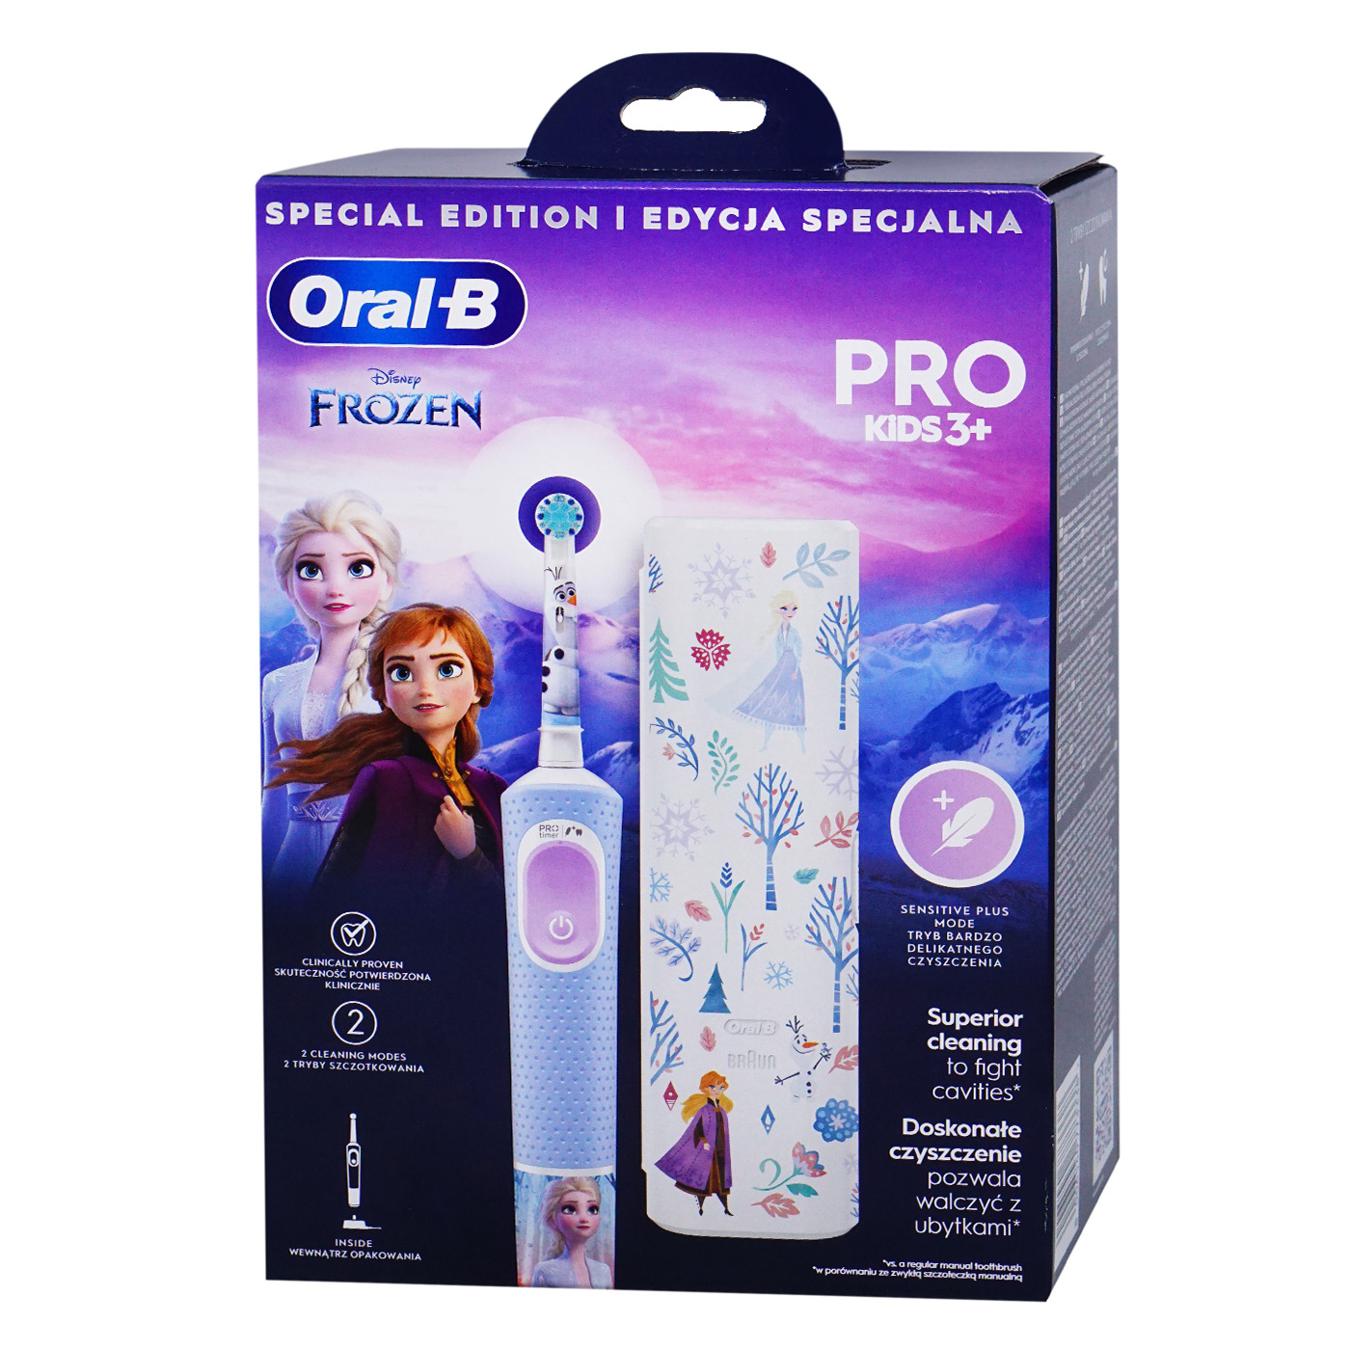 Toothbrush ORAL-B electric kids 3+ years D103.413.2KX frozen 3708+travel case